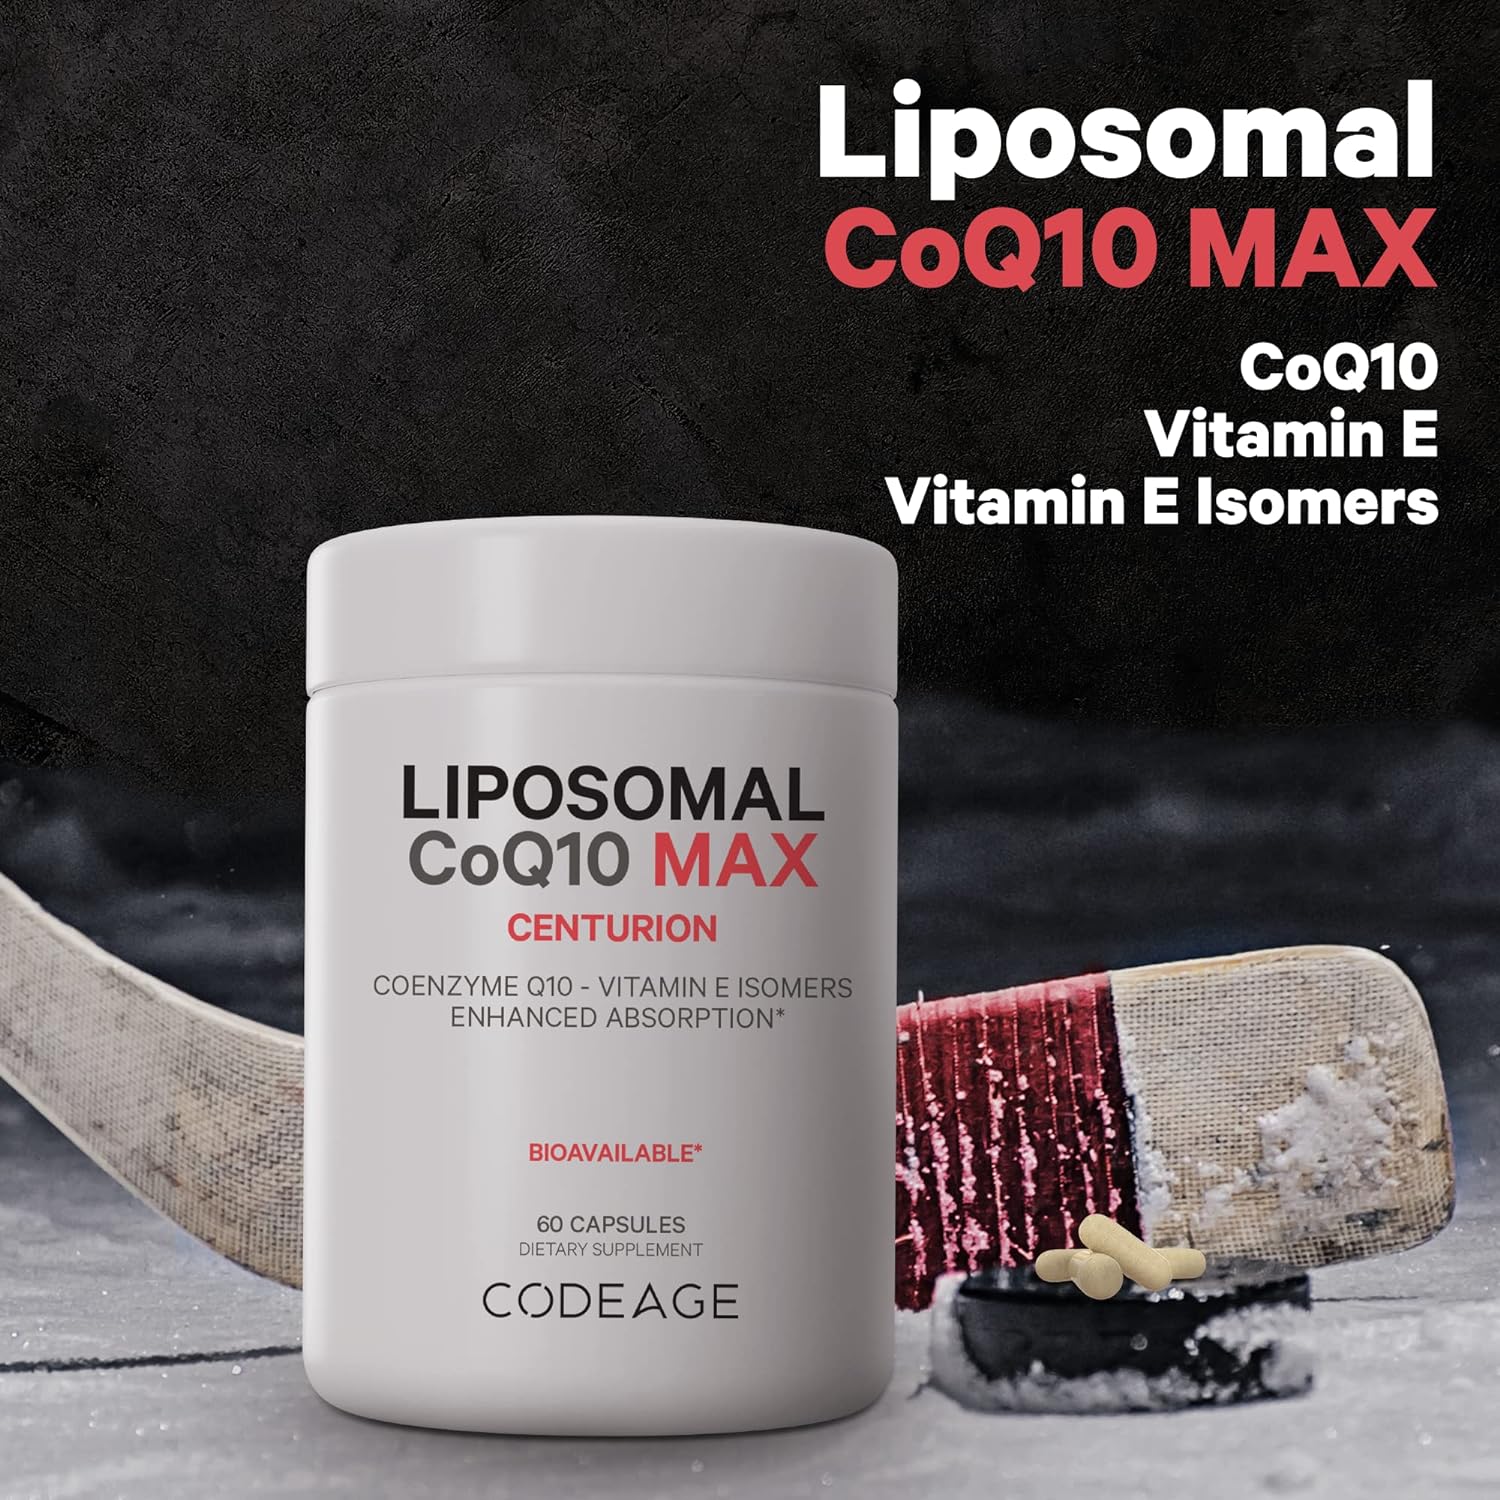 Codeage Liposomal CoQ10 Supplement Max - Vitamin E Isomers Tocopherols - 250mg Coenzyme Q10 - Cardiovascular & Energy Support Pills - Non-GMO, Vegan, Gluten-Free - 2 Month Supply - 60 Capsules : Health & Household